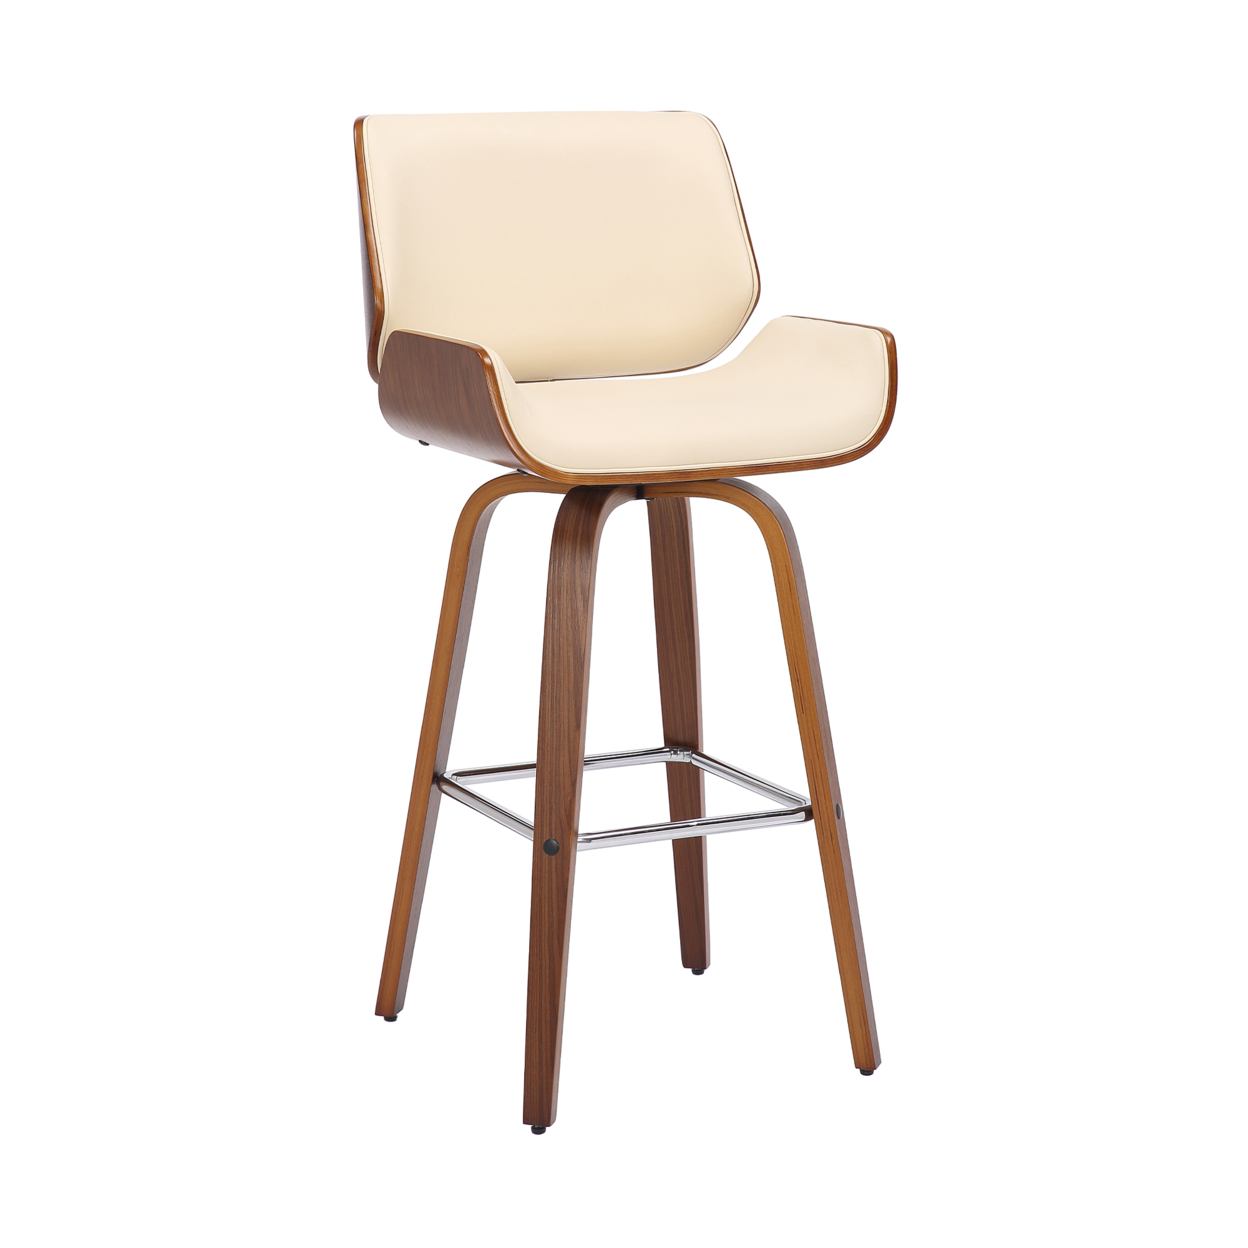 30 Inch Bar Stool With Curved Padded Back And Seat, Brown- Saltoro Sherpi